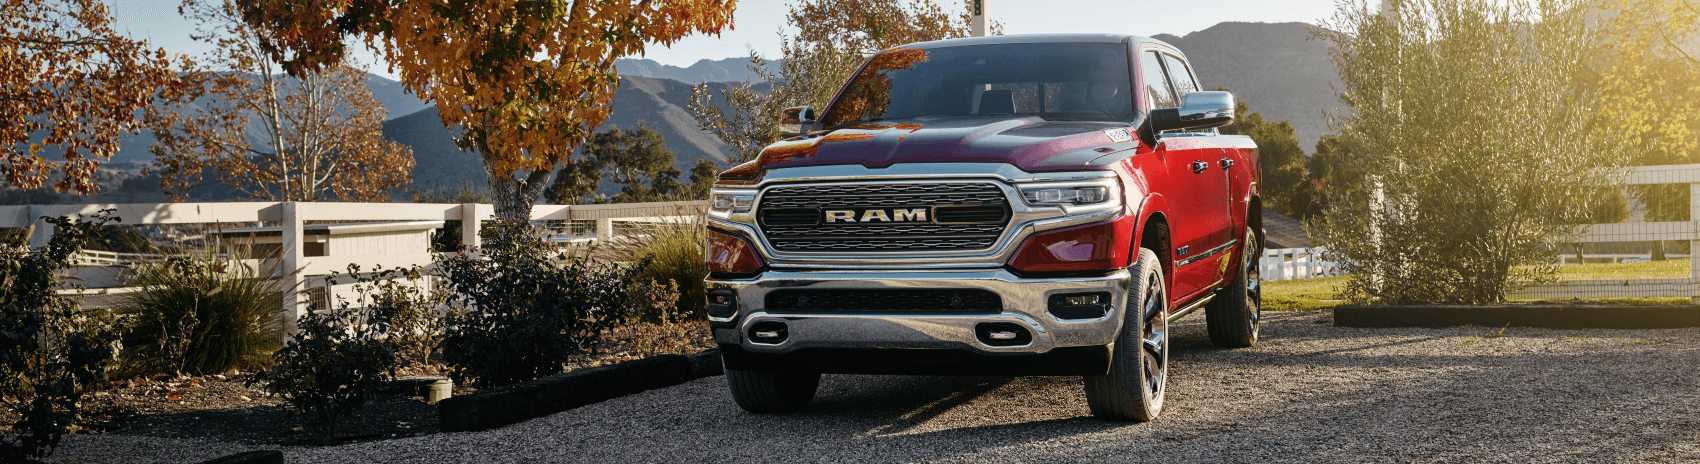 Used Ram 1500 Review